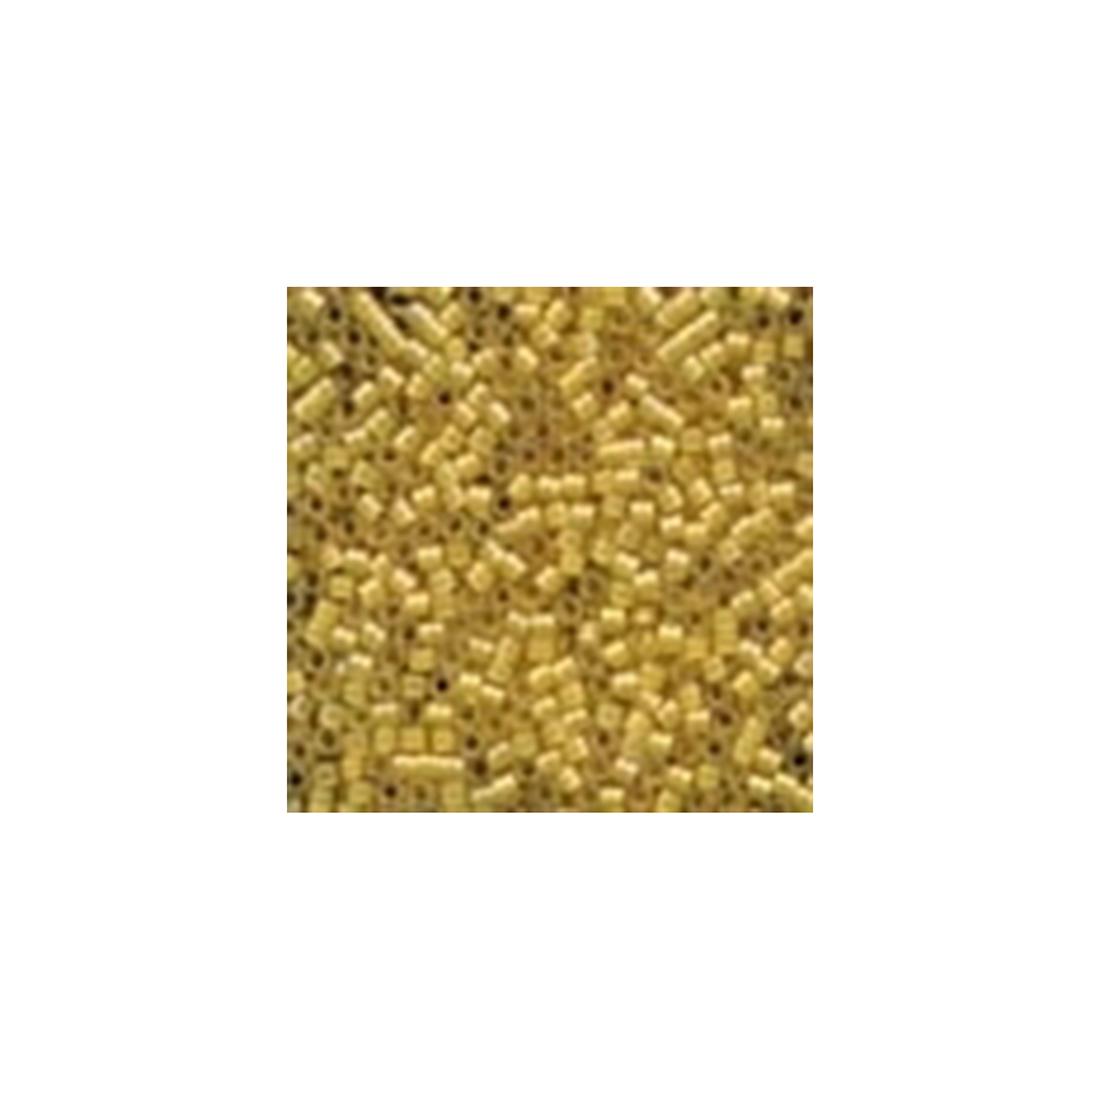 MHB - Size 12/0 Magnifica Beads - 10088 - Goldenrod